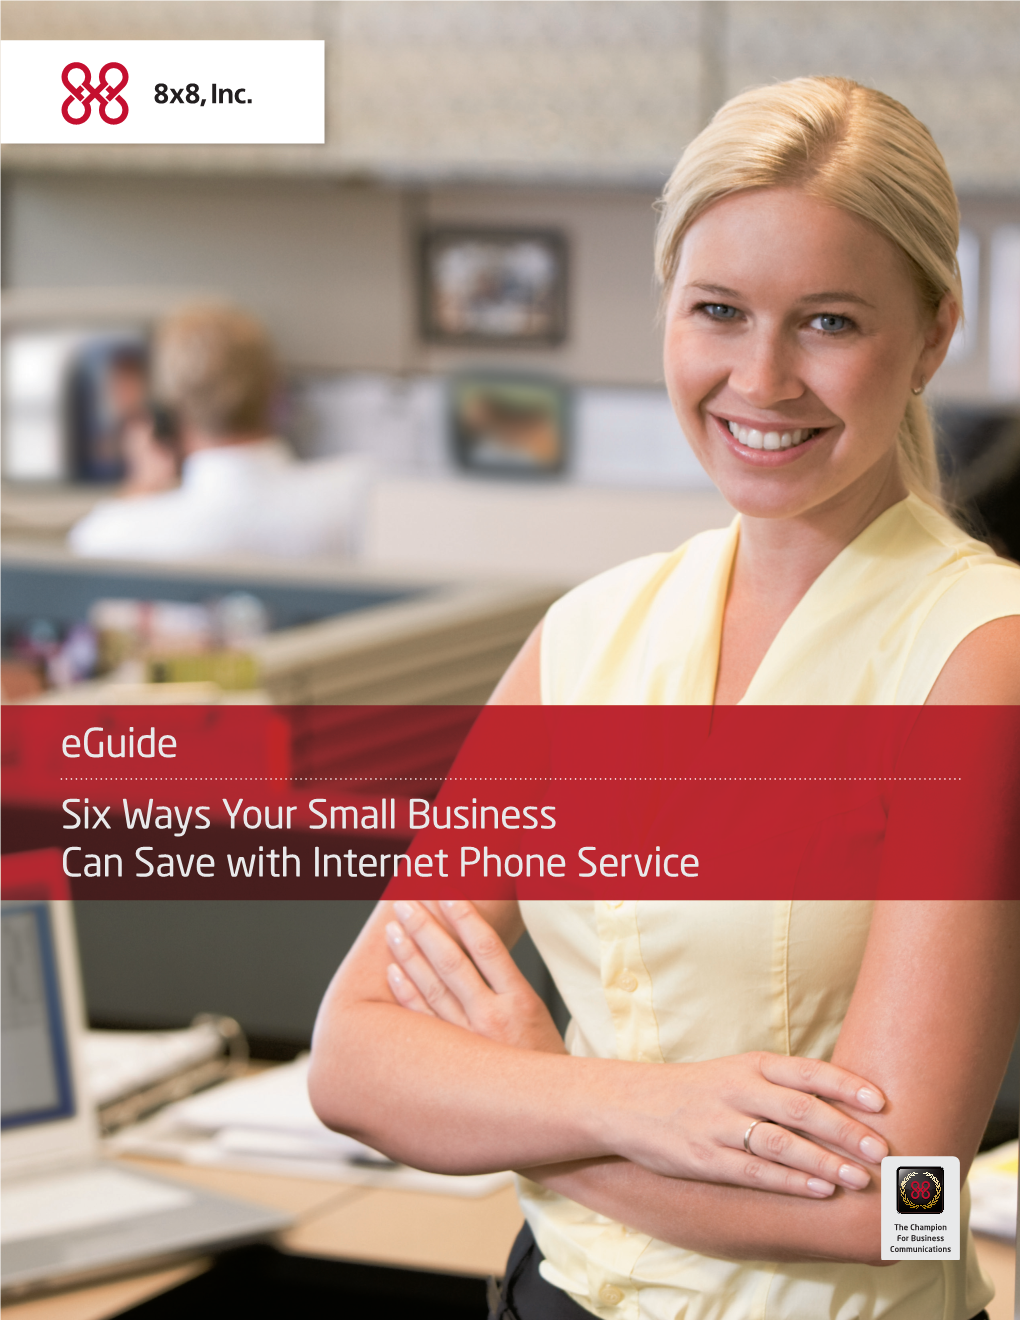 Eguide Six Ways Your Small Business Can Save with Internet Phone Service